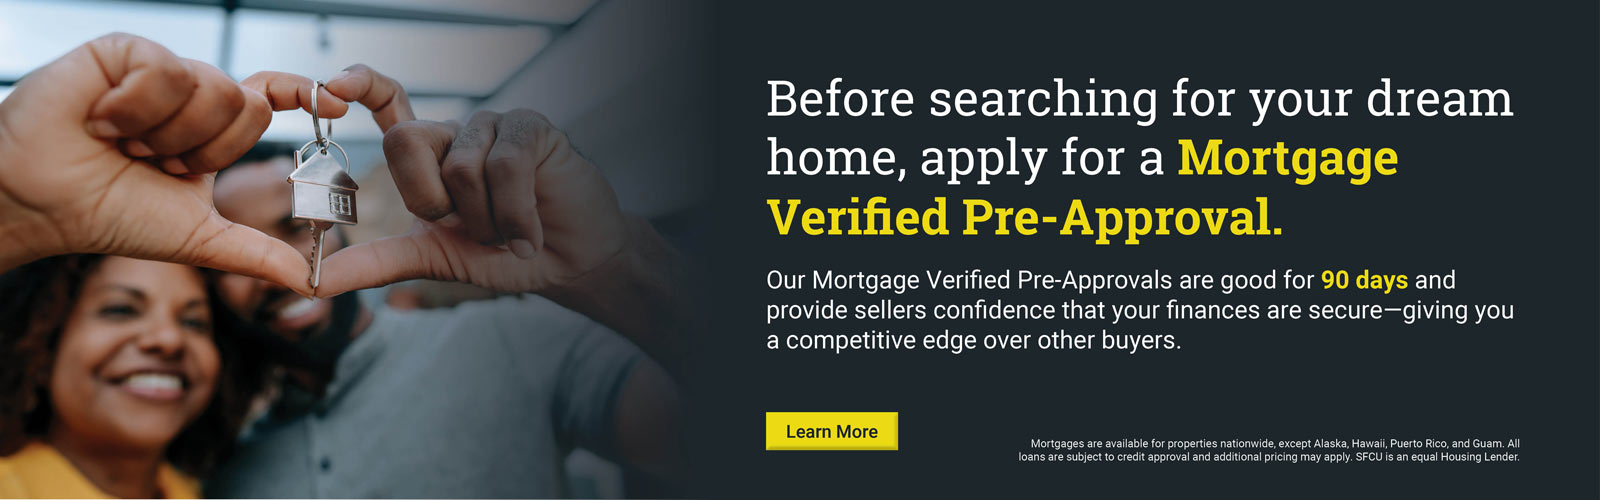 Before searching for your dream home, apply for a Mortgaged Verified Pre-Approval